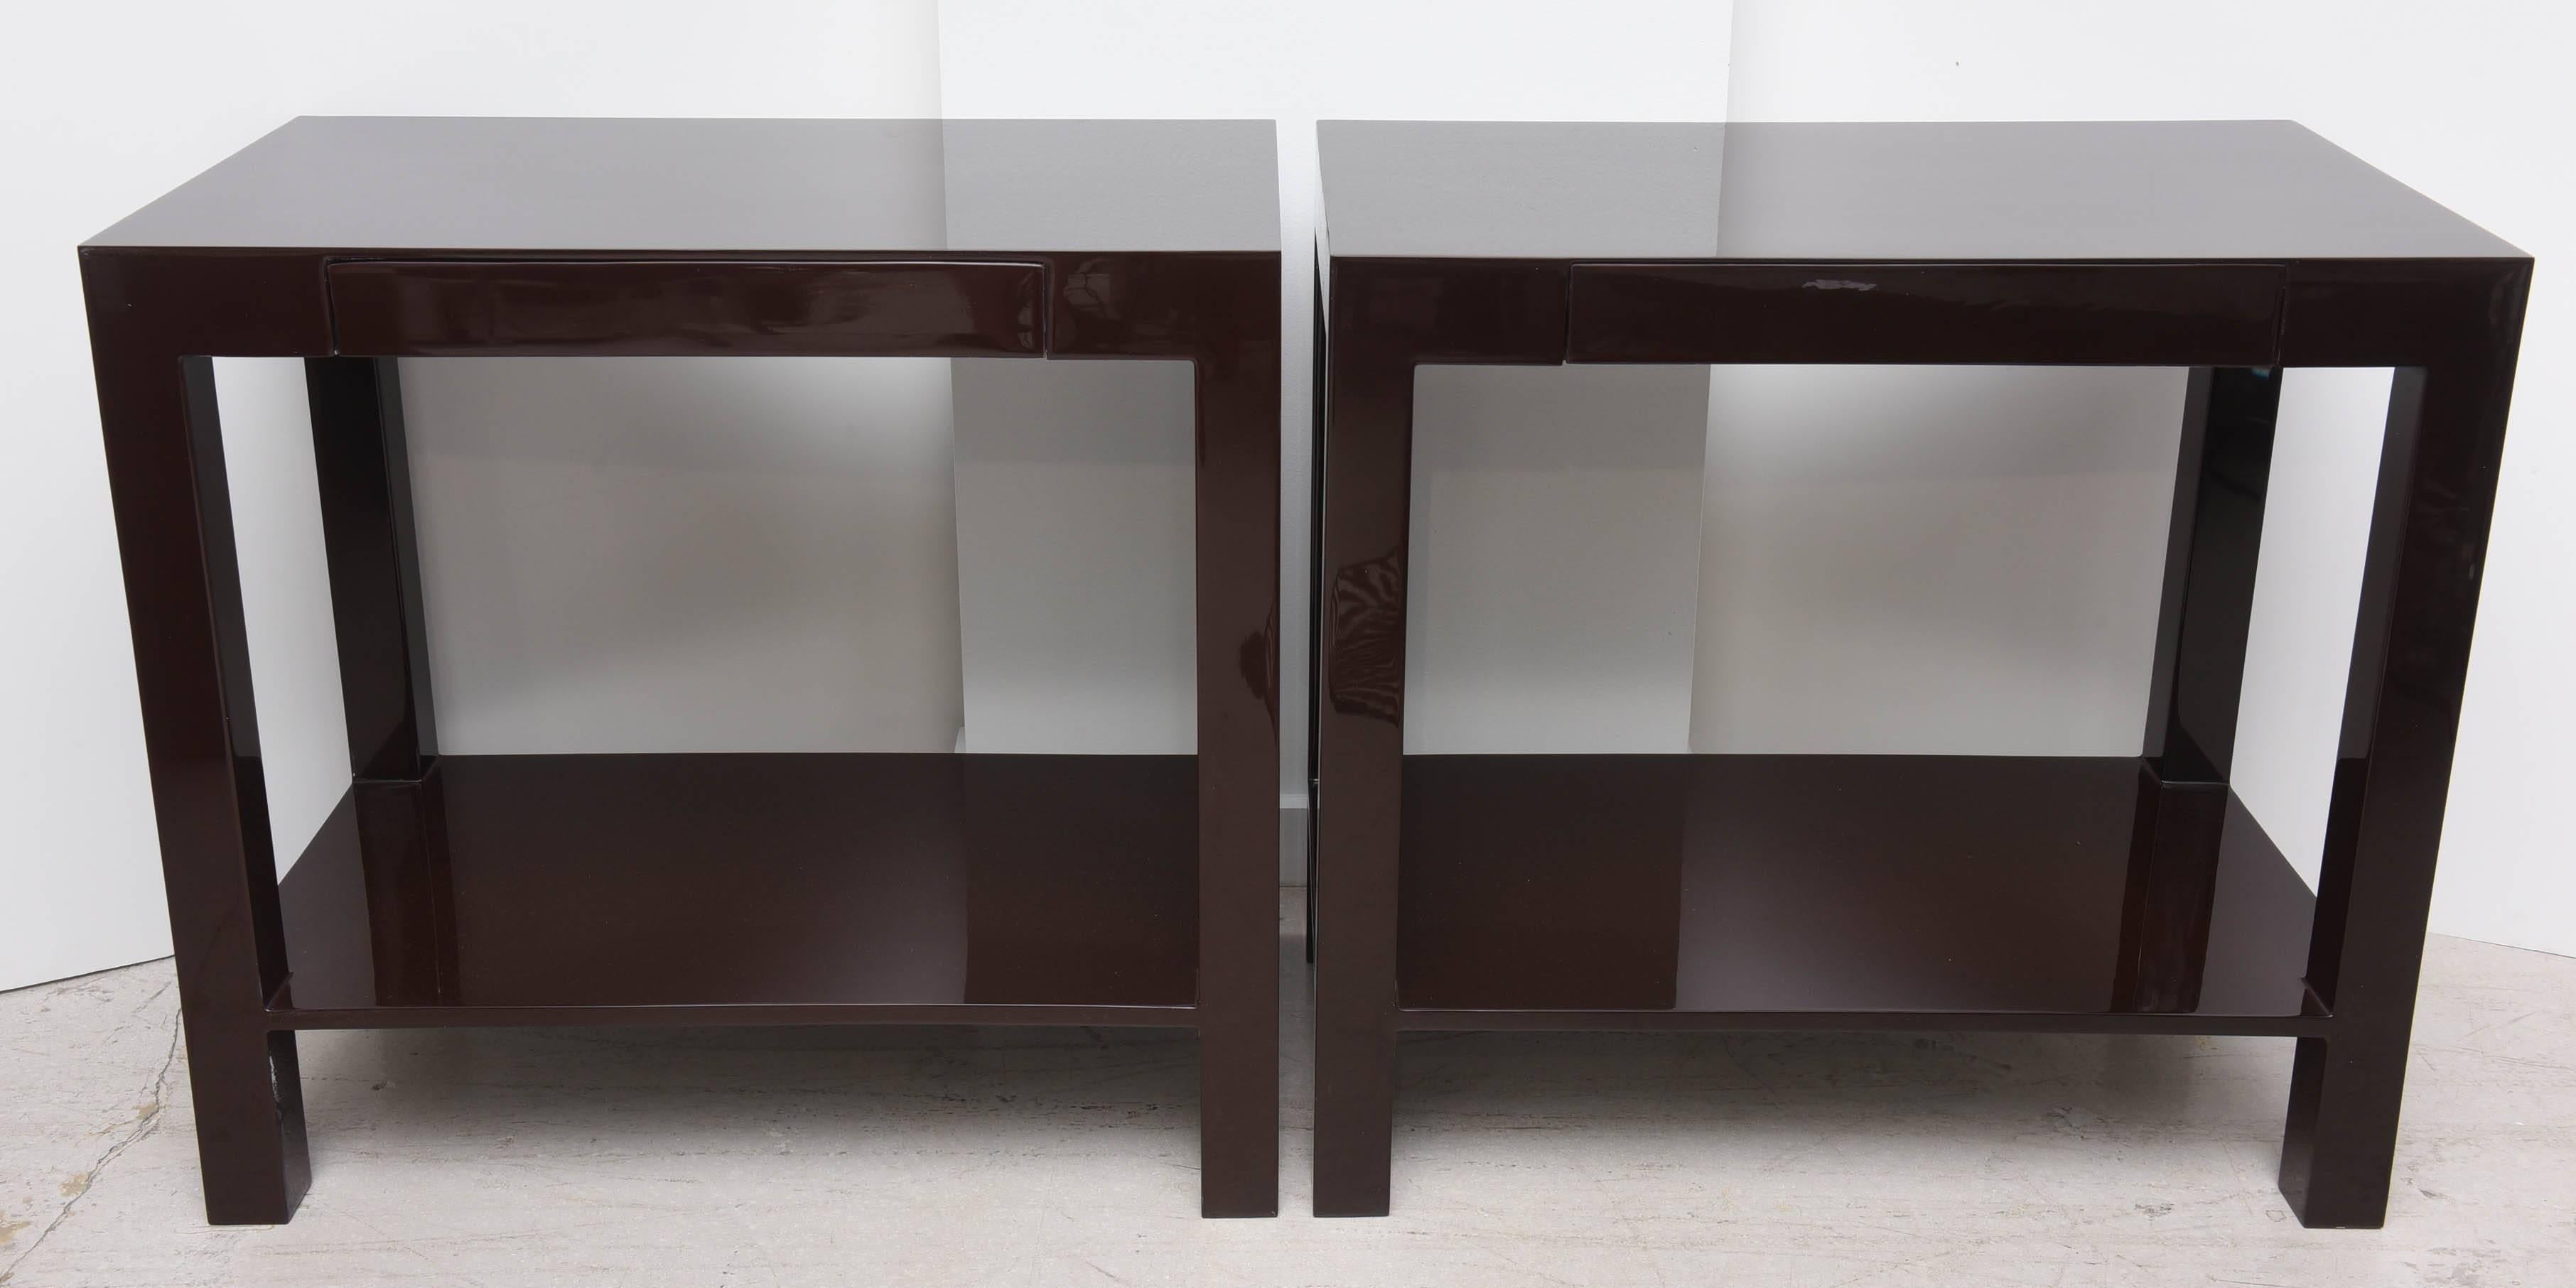 Pair of chocolate brown lacquer two-tier tables.